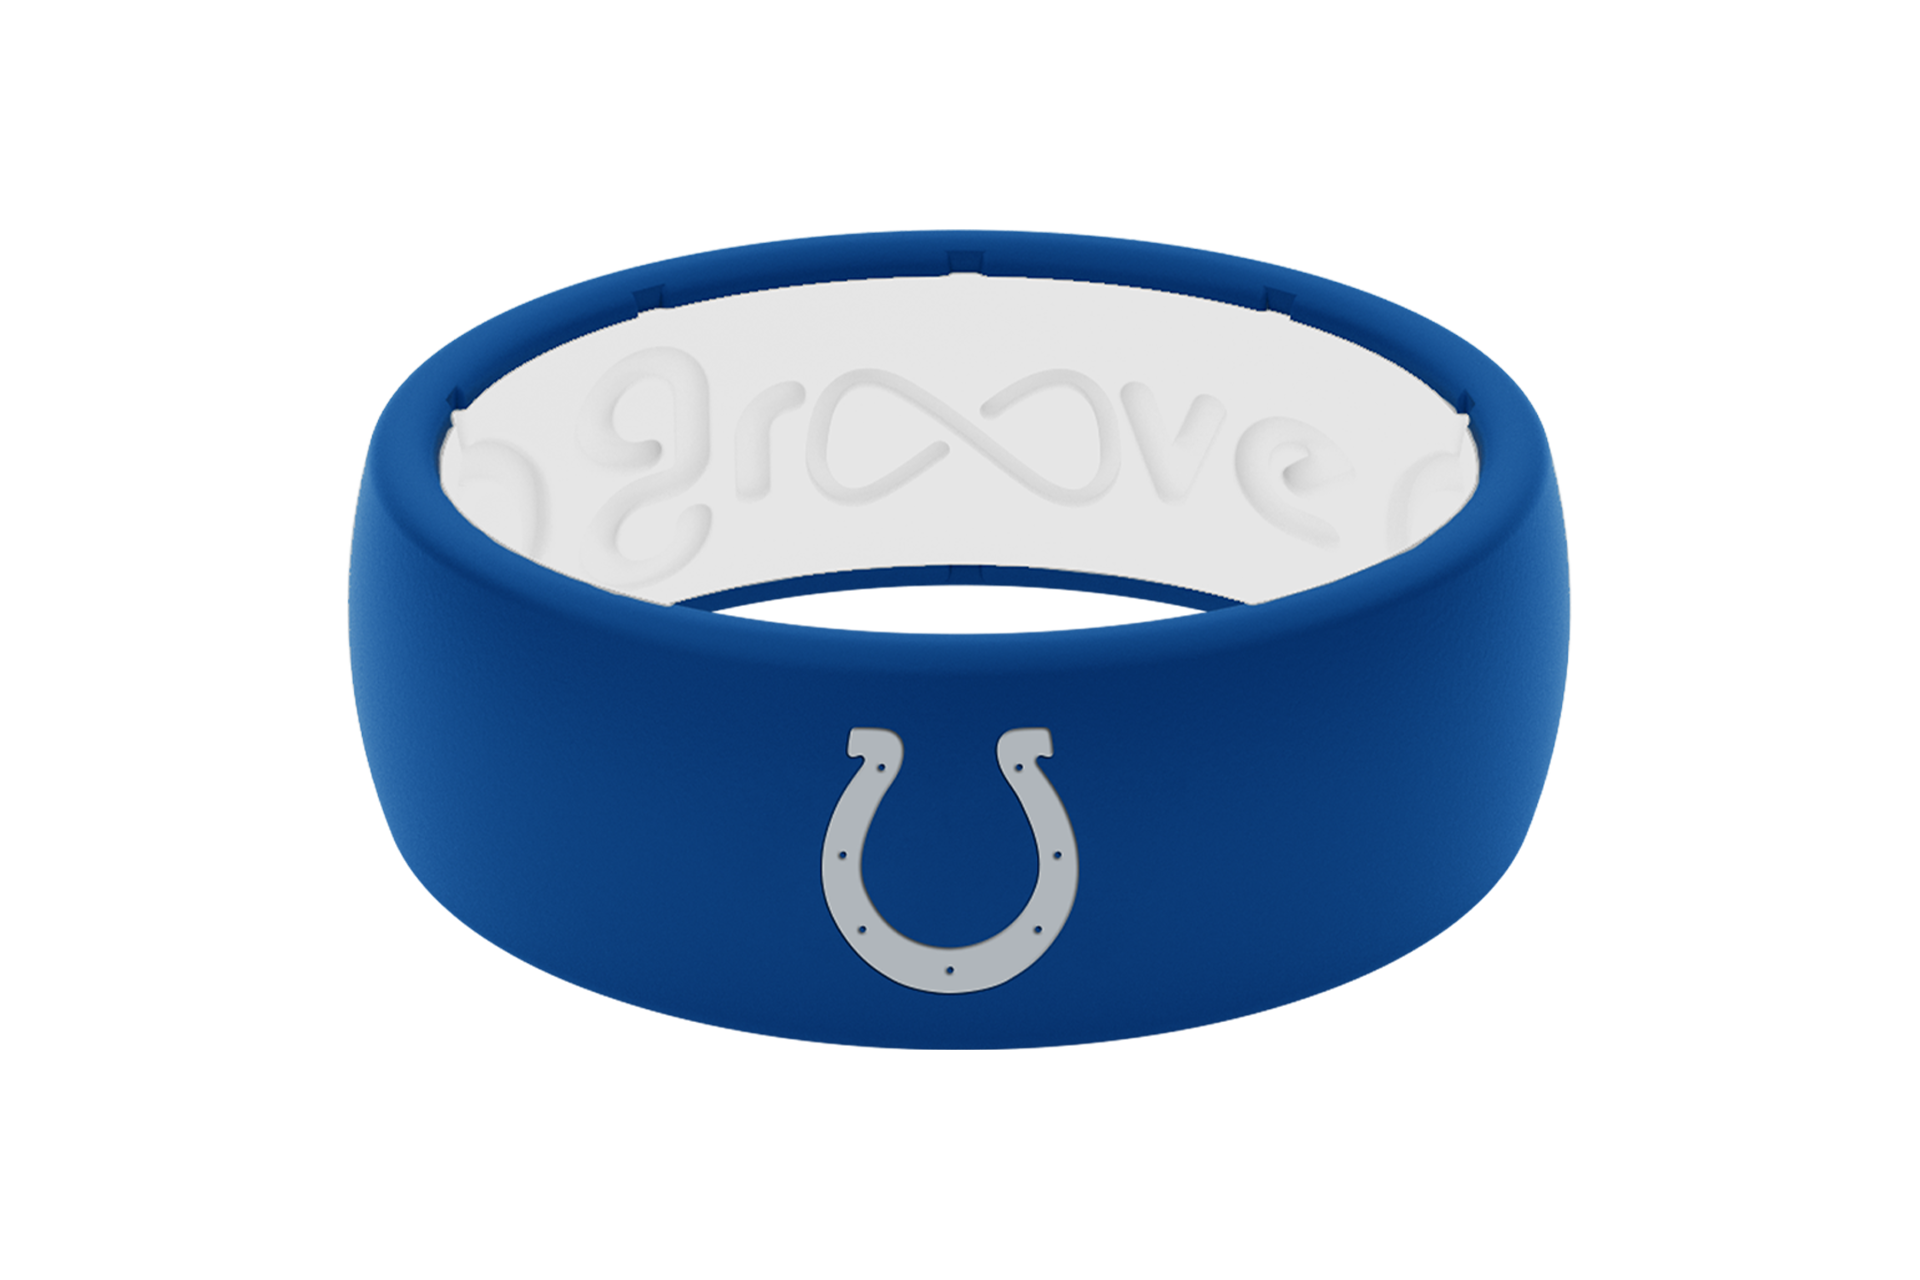 indy colts ring view 1 png